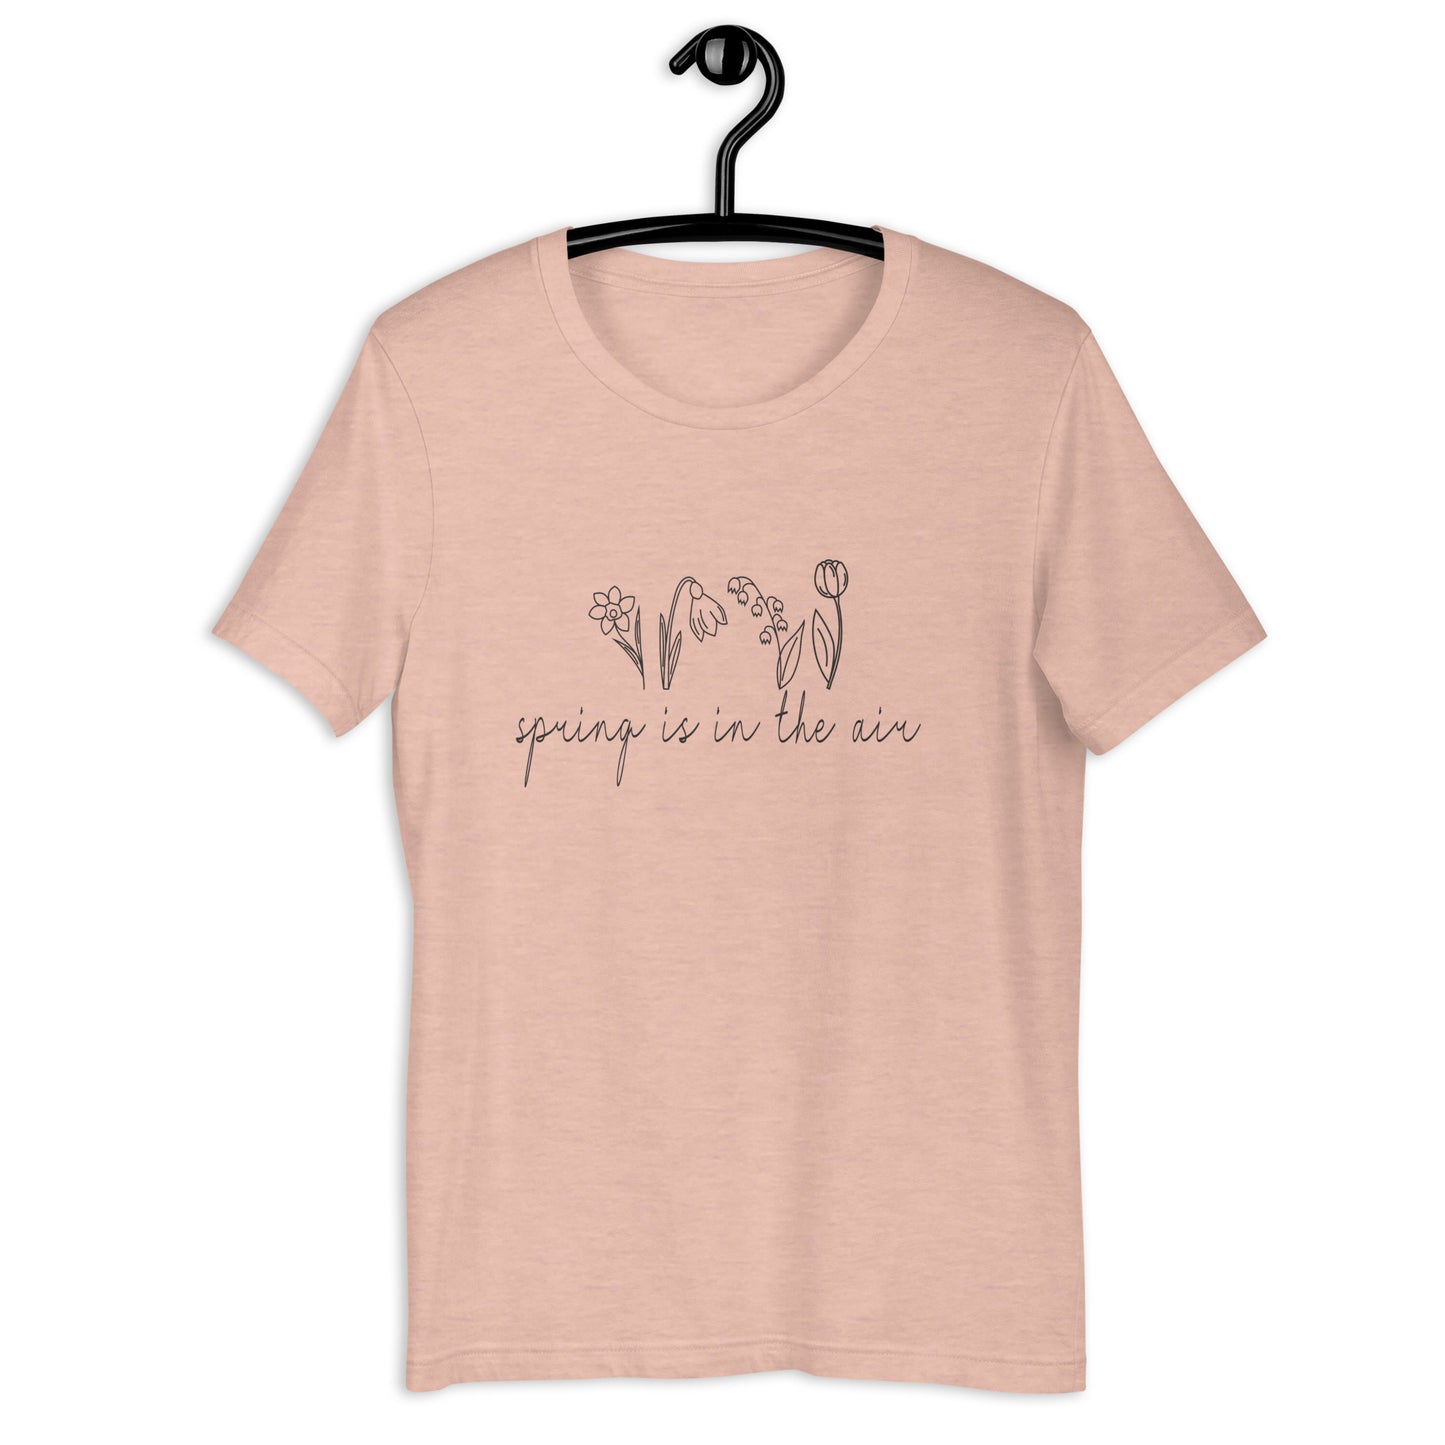 Spring Is In The Air with Spring Flowers - Unisex t-shirt